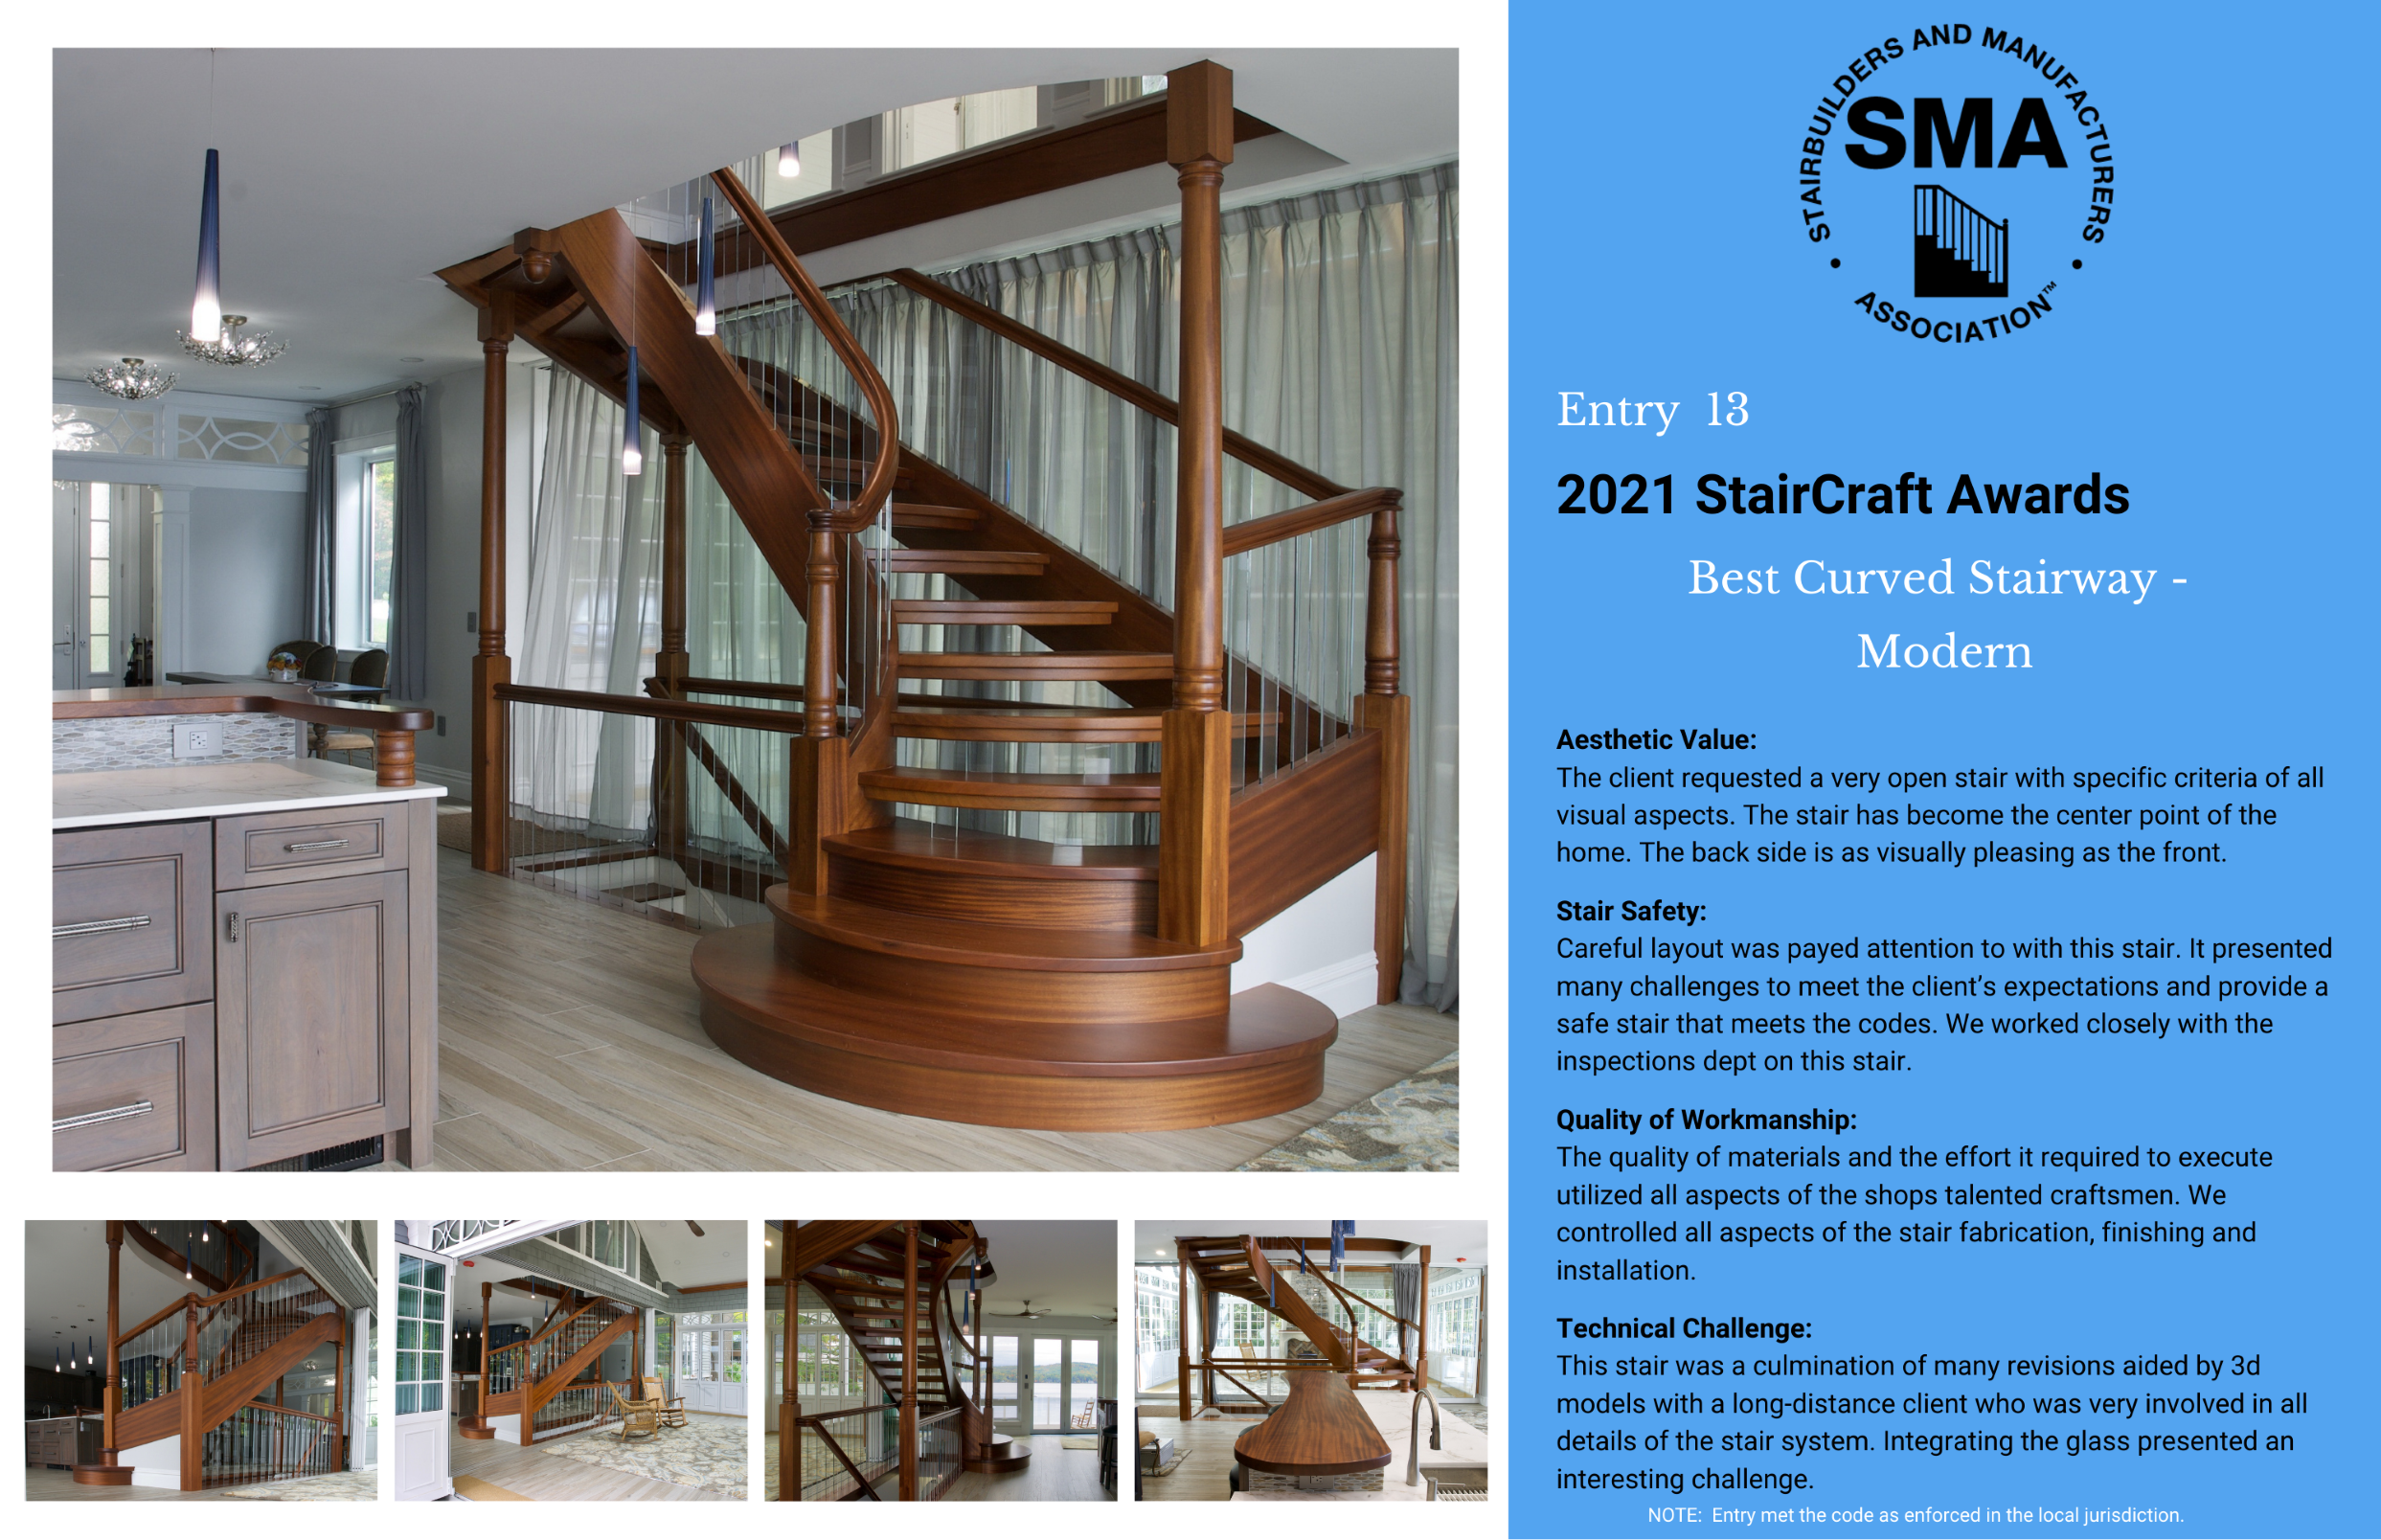 2021 StairCraft Awards Entry 13